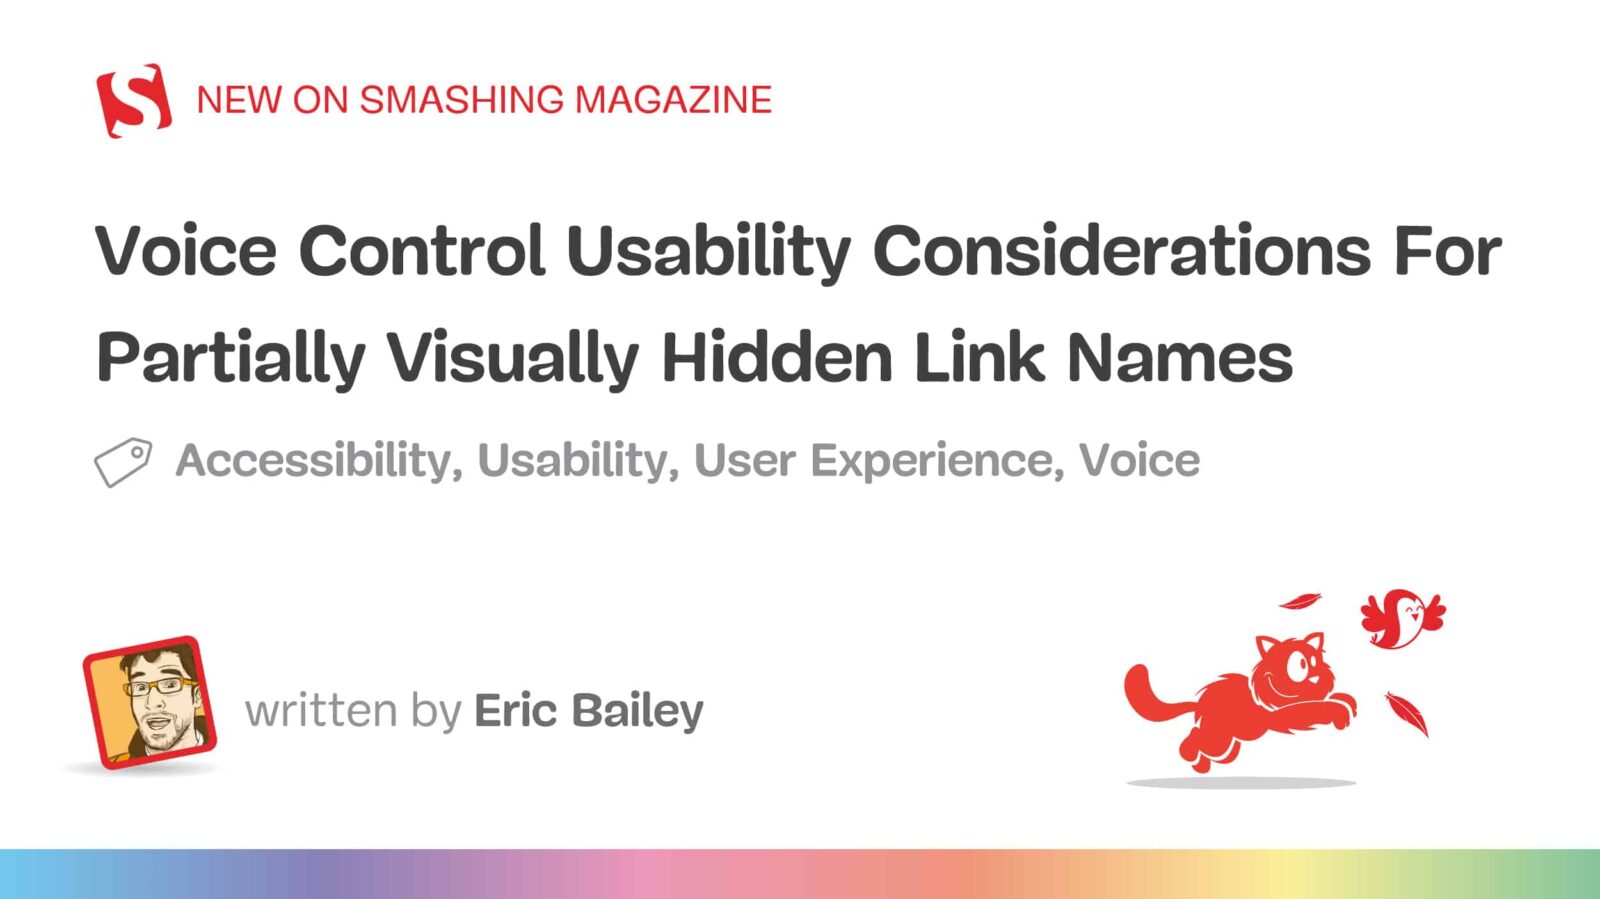 Voice Management Usability Concerns For Partially Visually Hidden Hyperlink Names